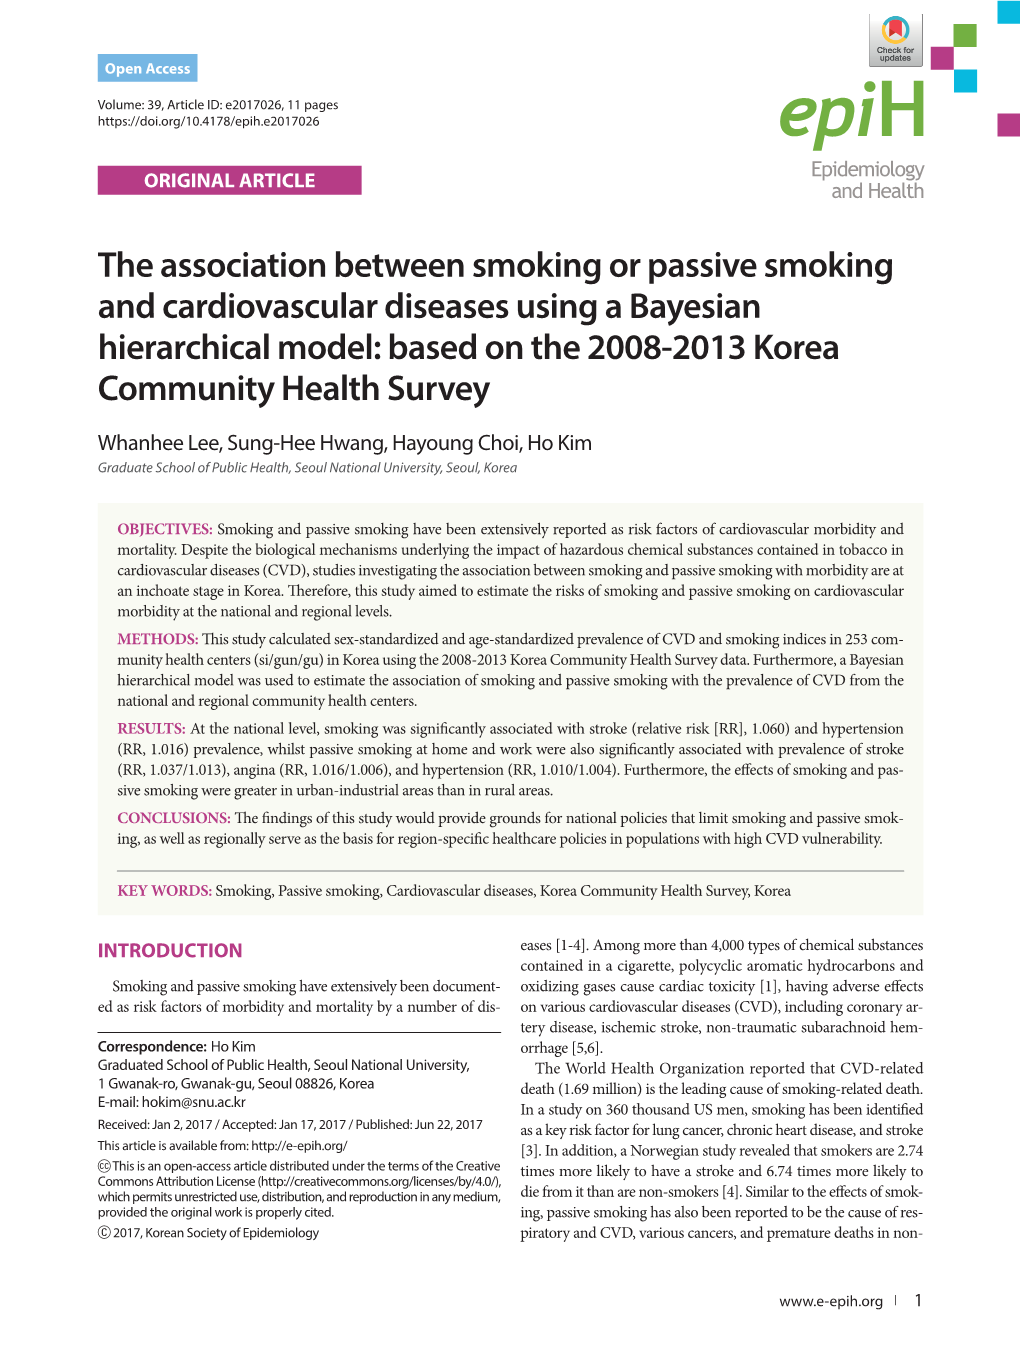 The Association Between Smoking Or Passive